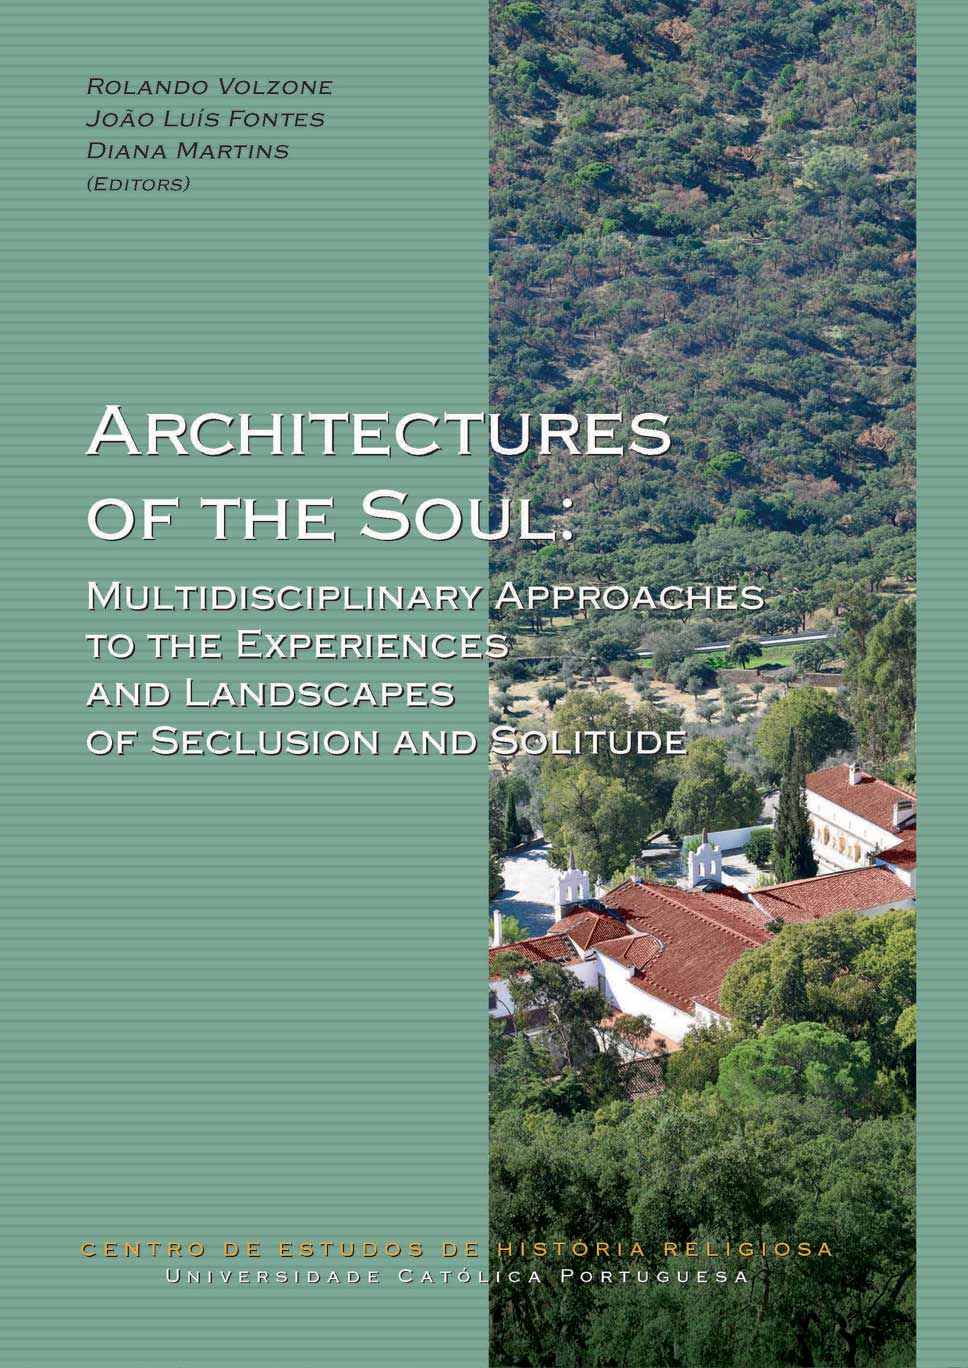 Capa da publicação Architectures of the soul: multidisciplinary approaches to the experiences and landscapes of seclusion and solitude